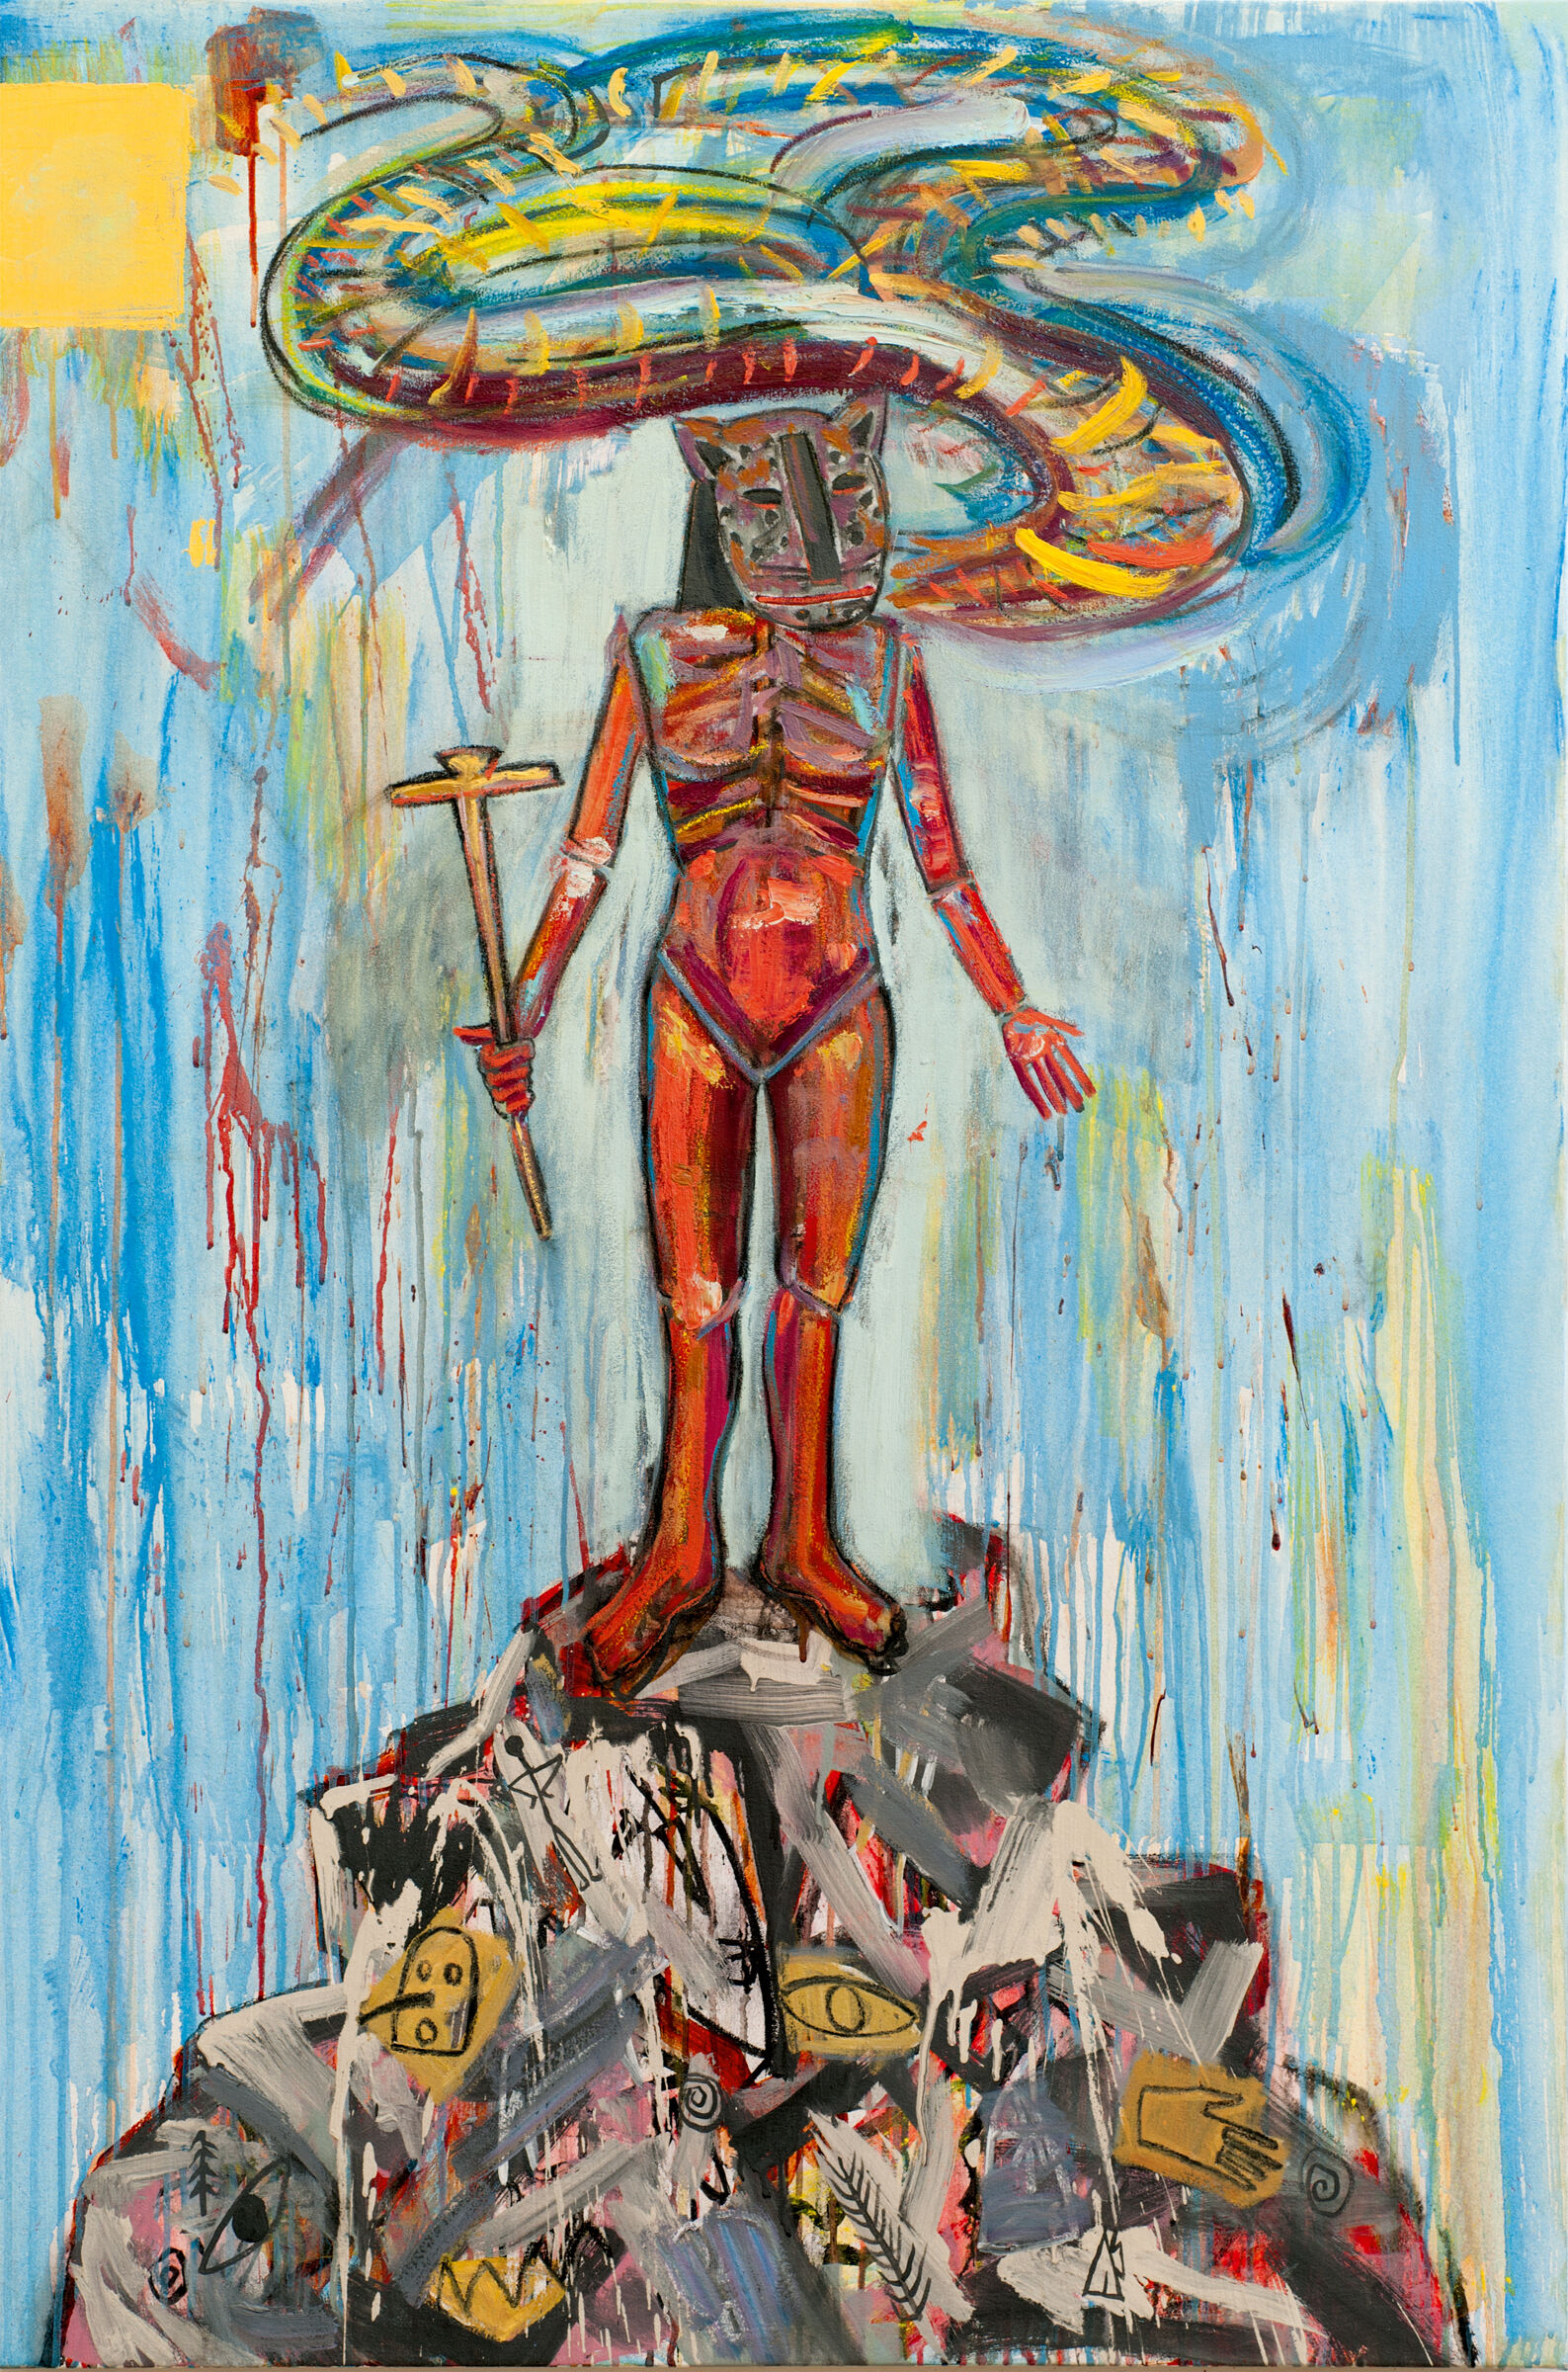 A person with a feline head stands a top a pile of materials with a twisting shape of color swirling around their head.